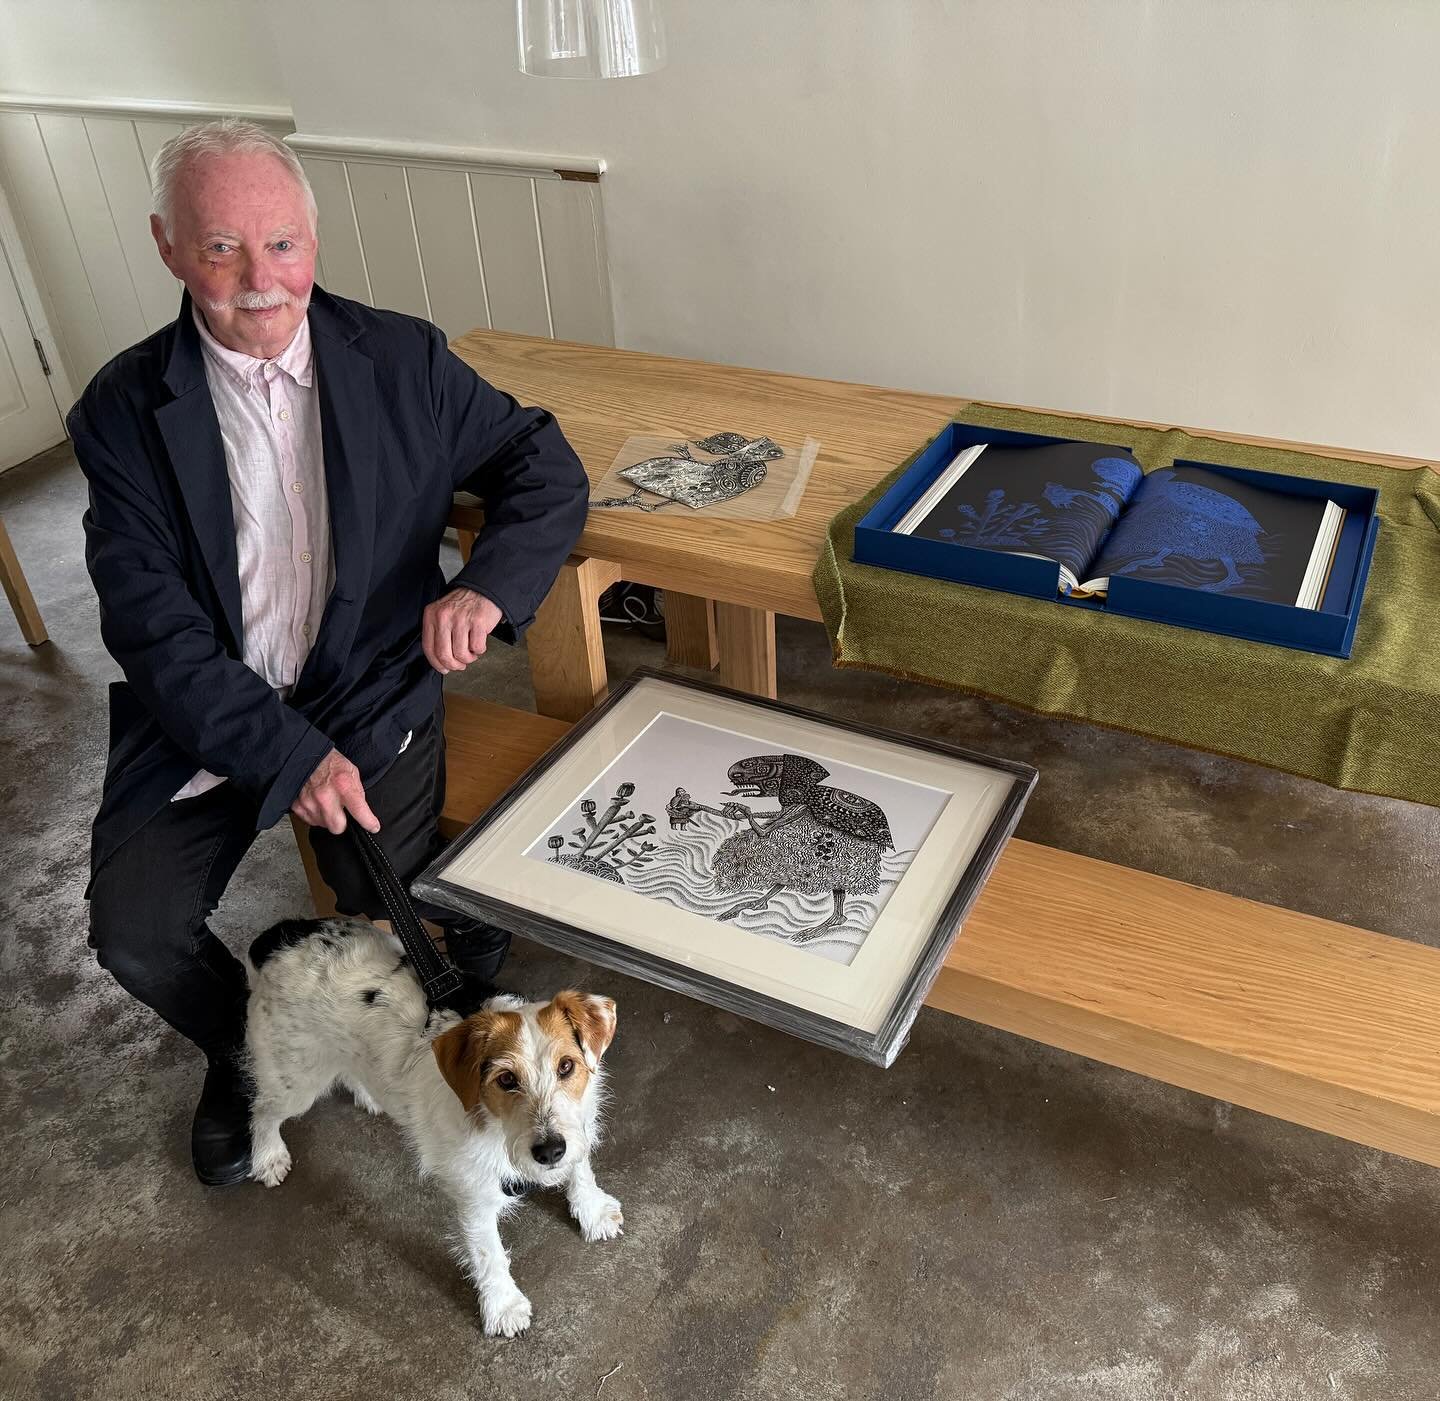 Clive Hicks-Jenkins with Rudi after delivering his exhibition to The Table which opens this Saturday 18th at 11am and on the table is Beowulf published by The Folio Society and illustrated by Clive with one of the framed original illustrations alongs